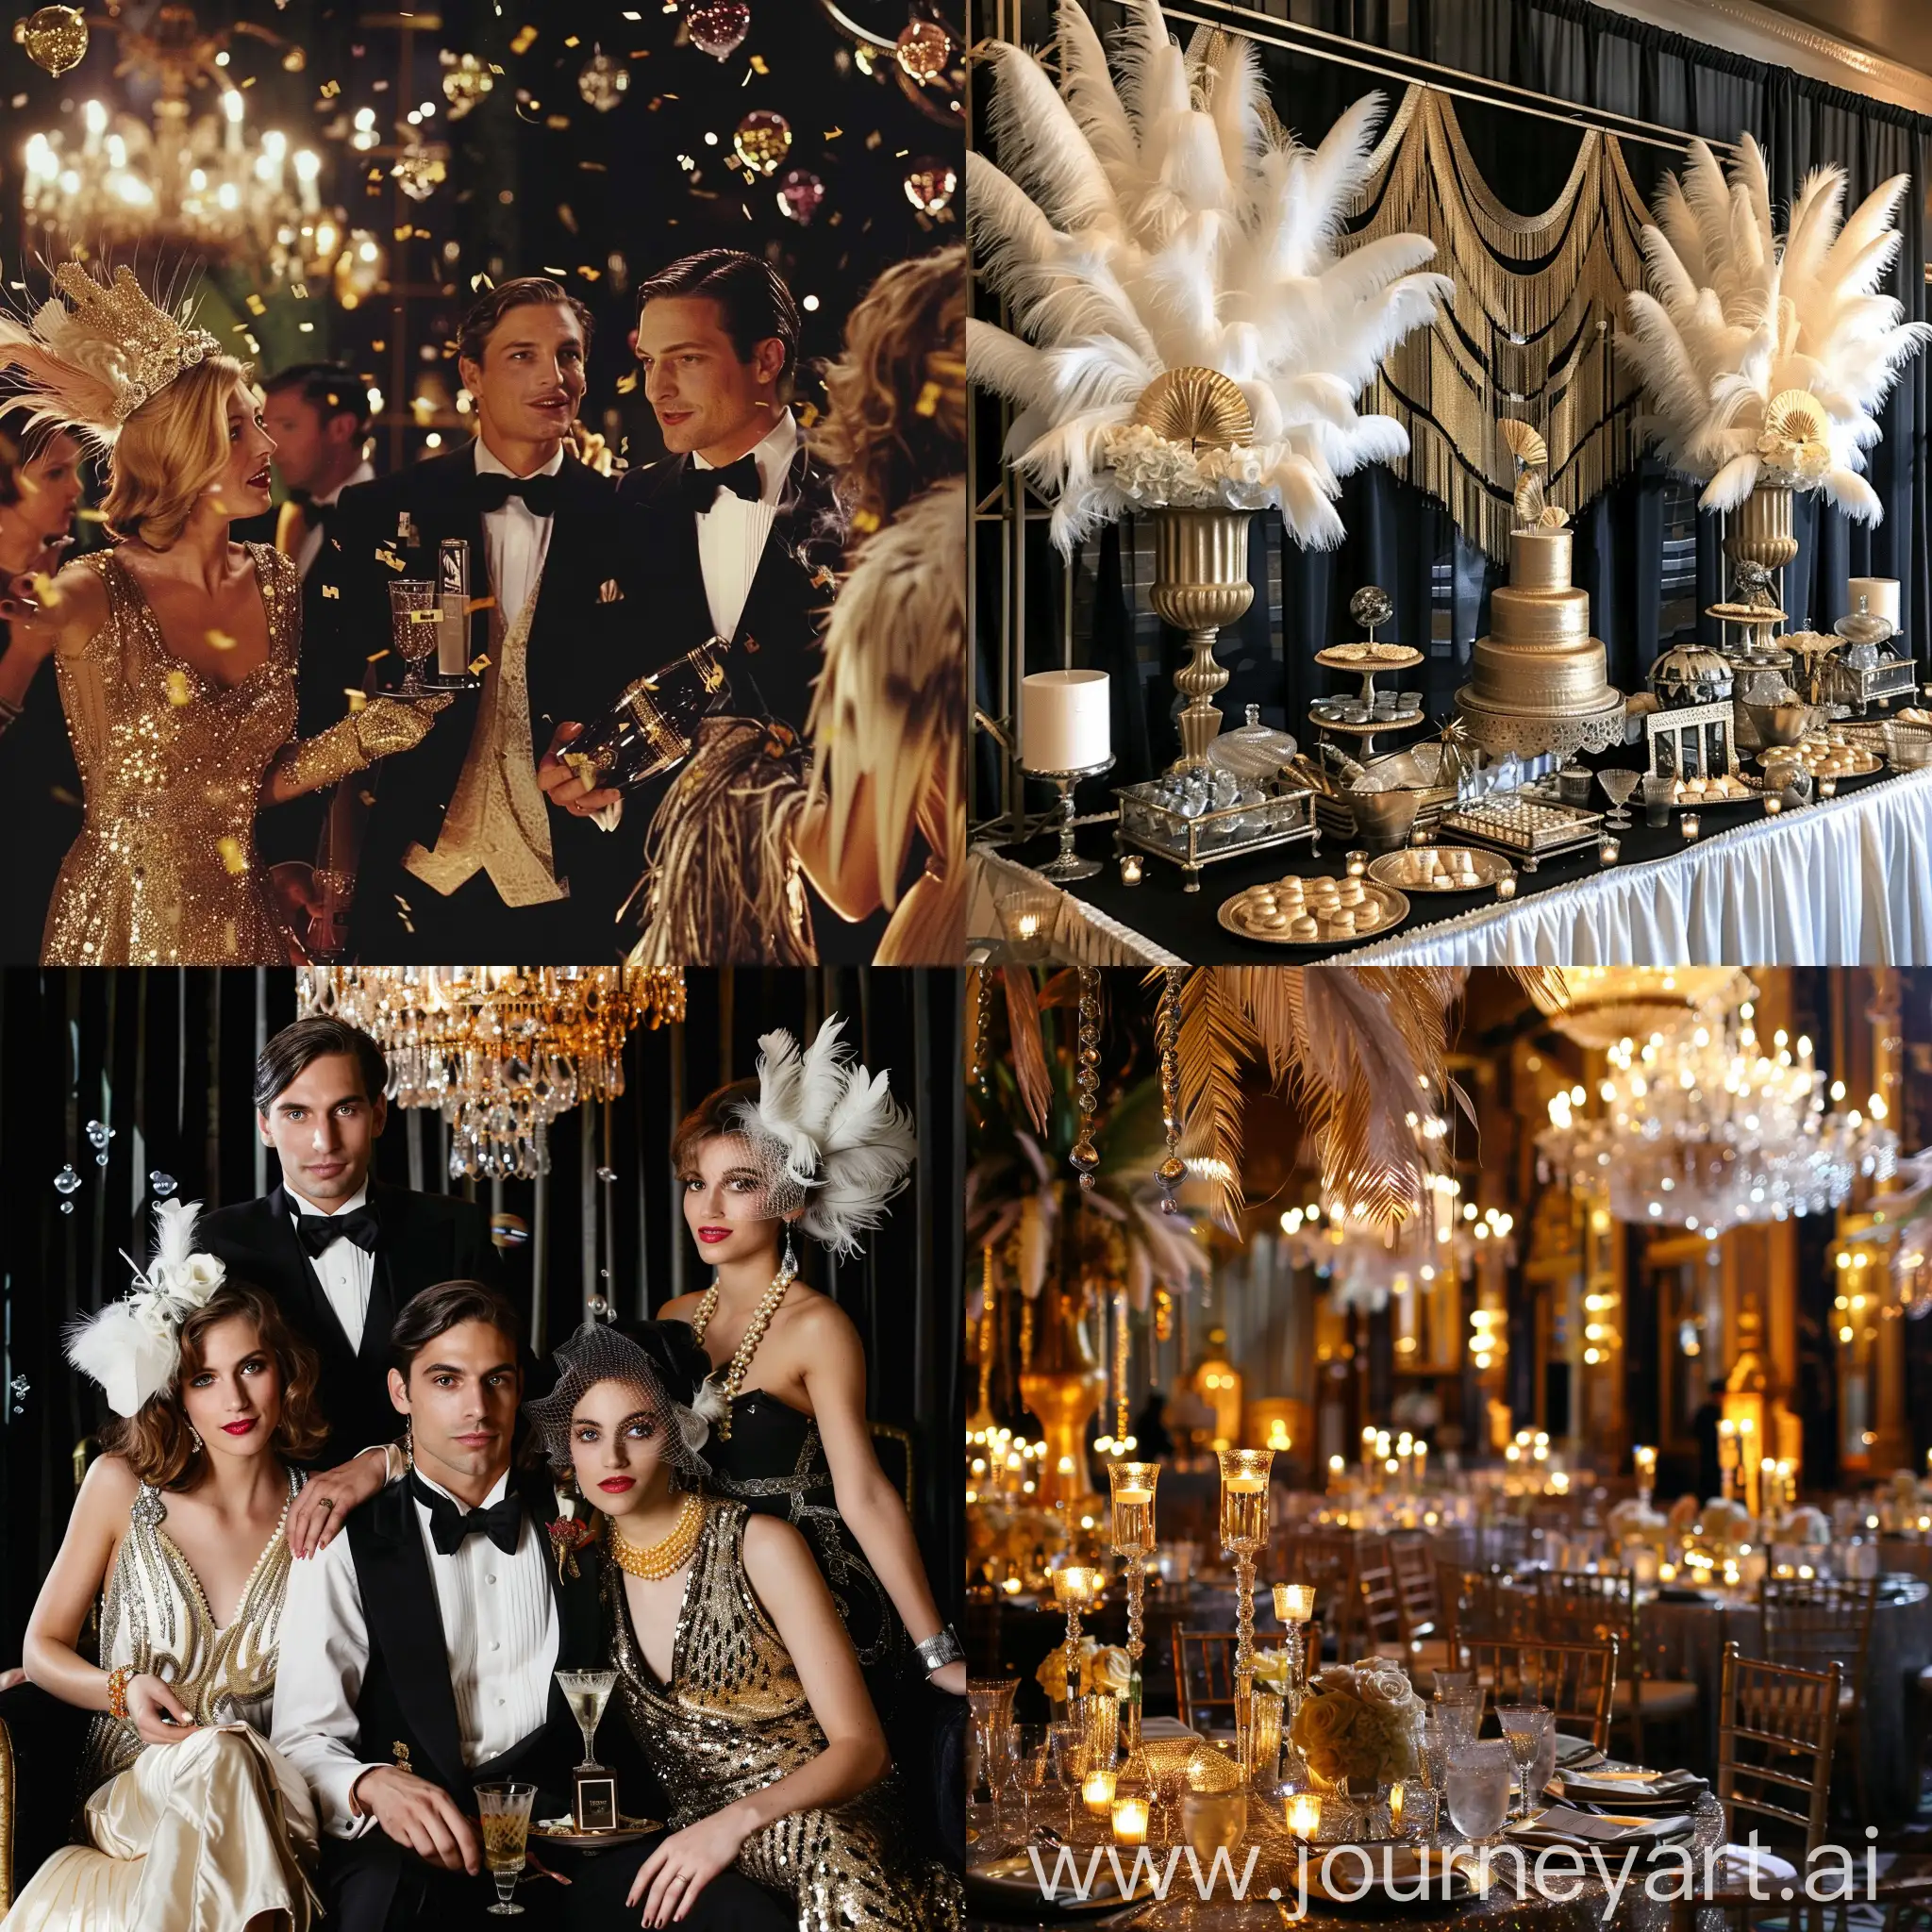 An Great Gatsby Party in the style of Michael Goddard